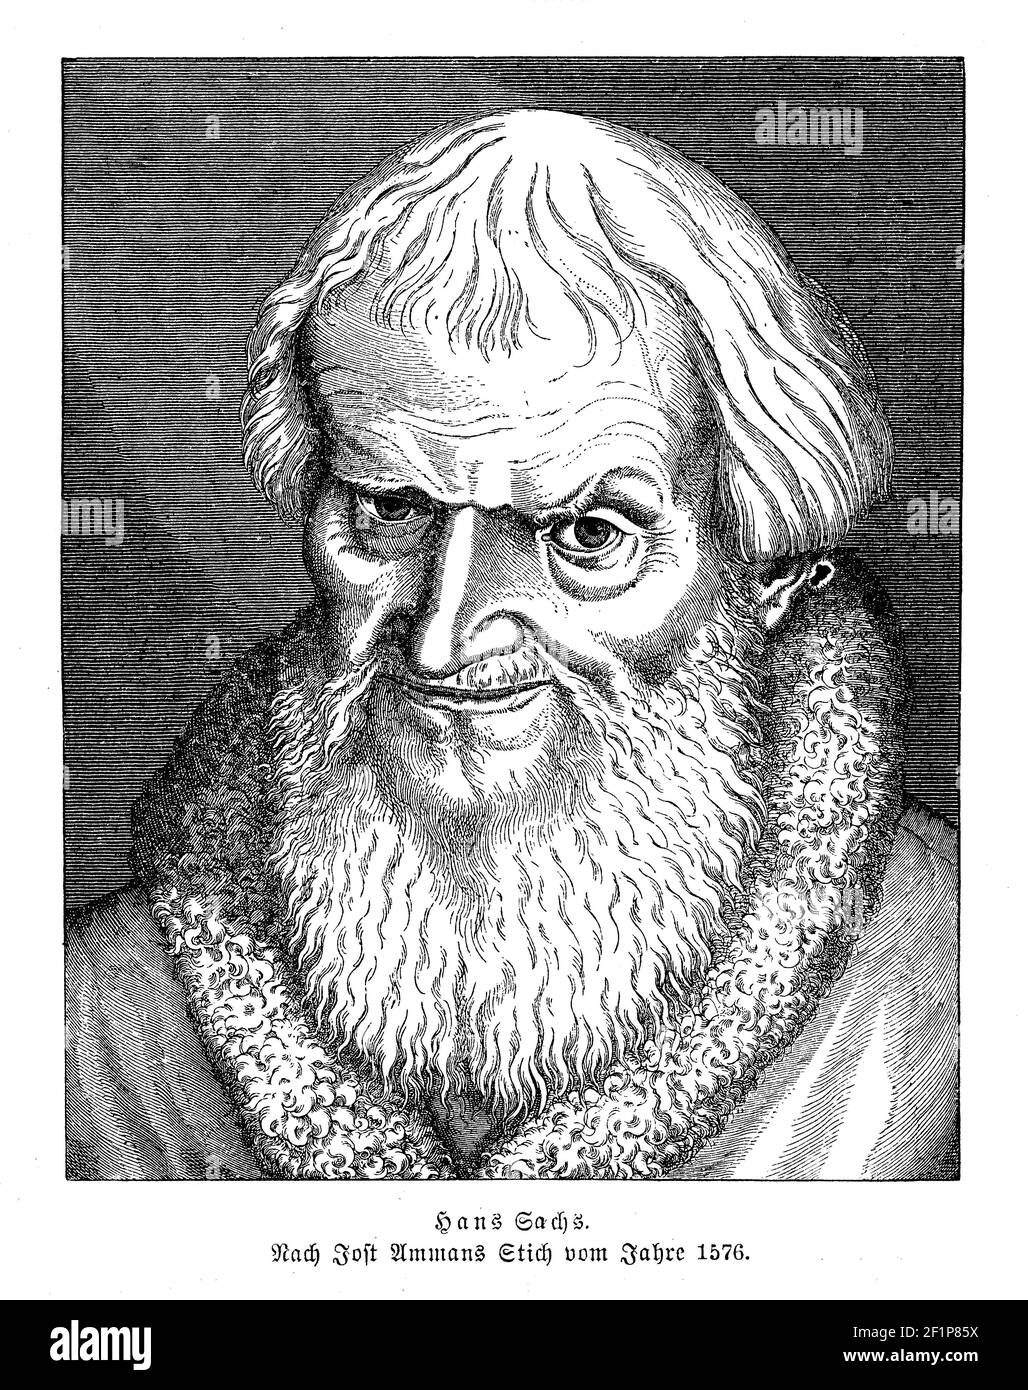 Hans Sachs ( 1494 - 1576) German  mastersinger, poet, playwright, and shoemaker, engraving portrait by Jost Amman 1576 Stock Photo